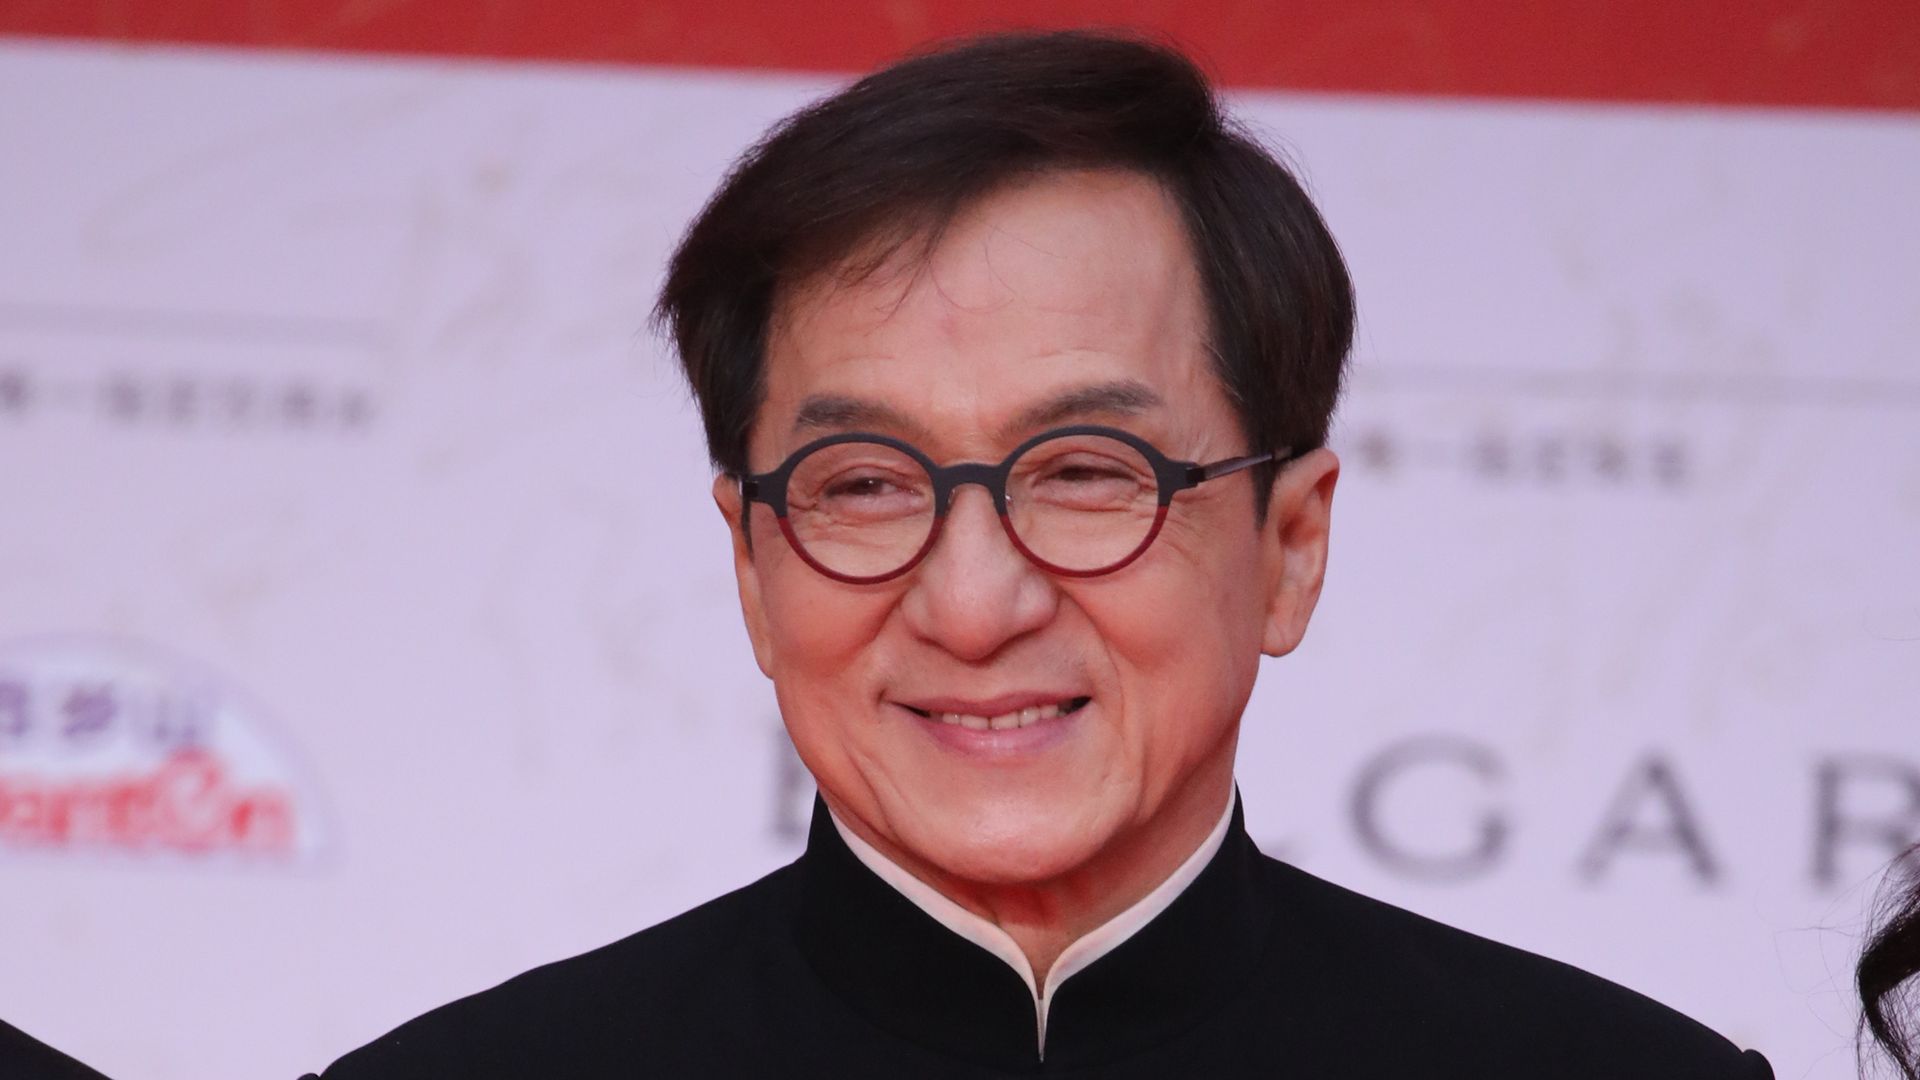 Actor Jackie Chan arrives at opening ceremony red carpet for the 2023 Beijing International Film Festival at Yanqi Lake International Convention and Exhibition Center on April 21, 2023 in Beijing, China.